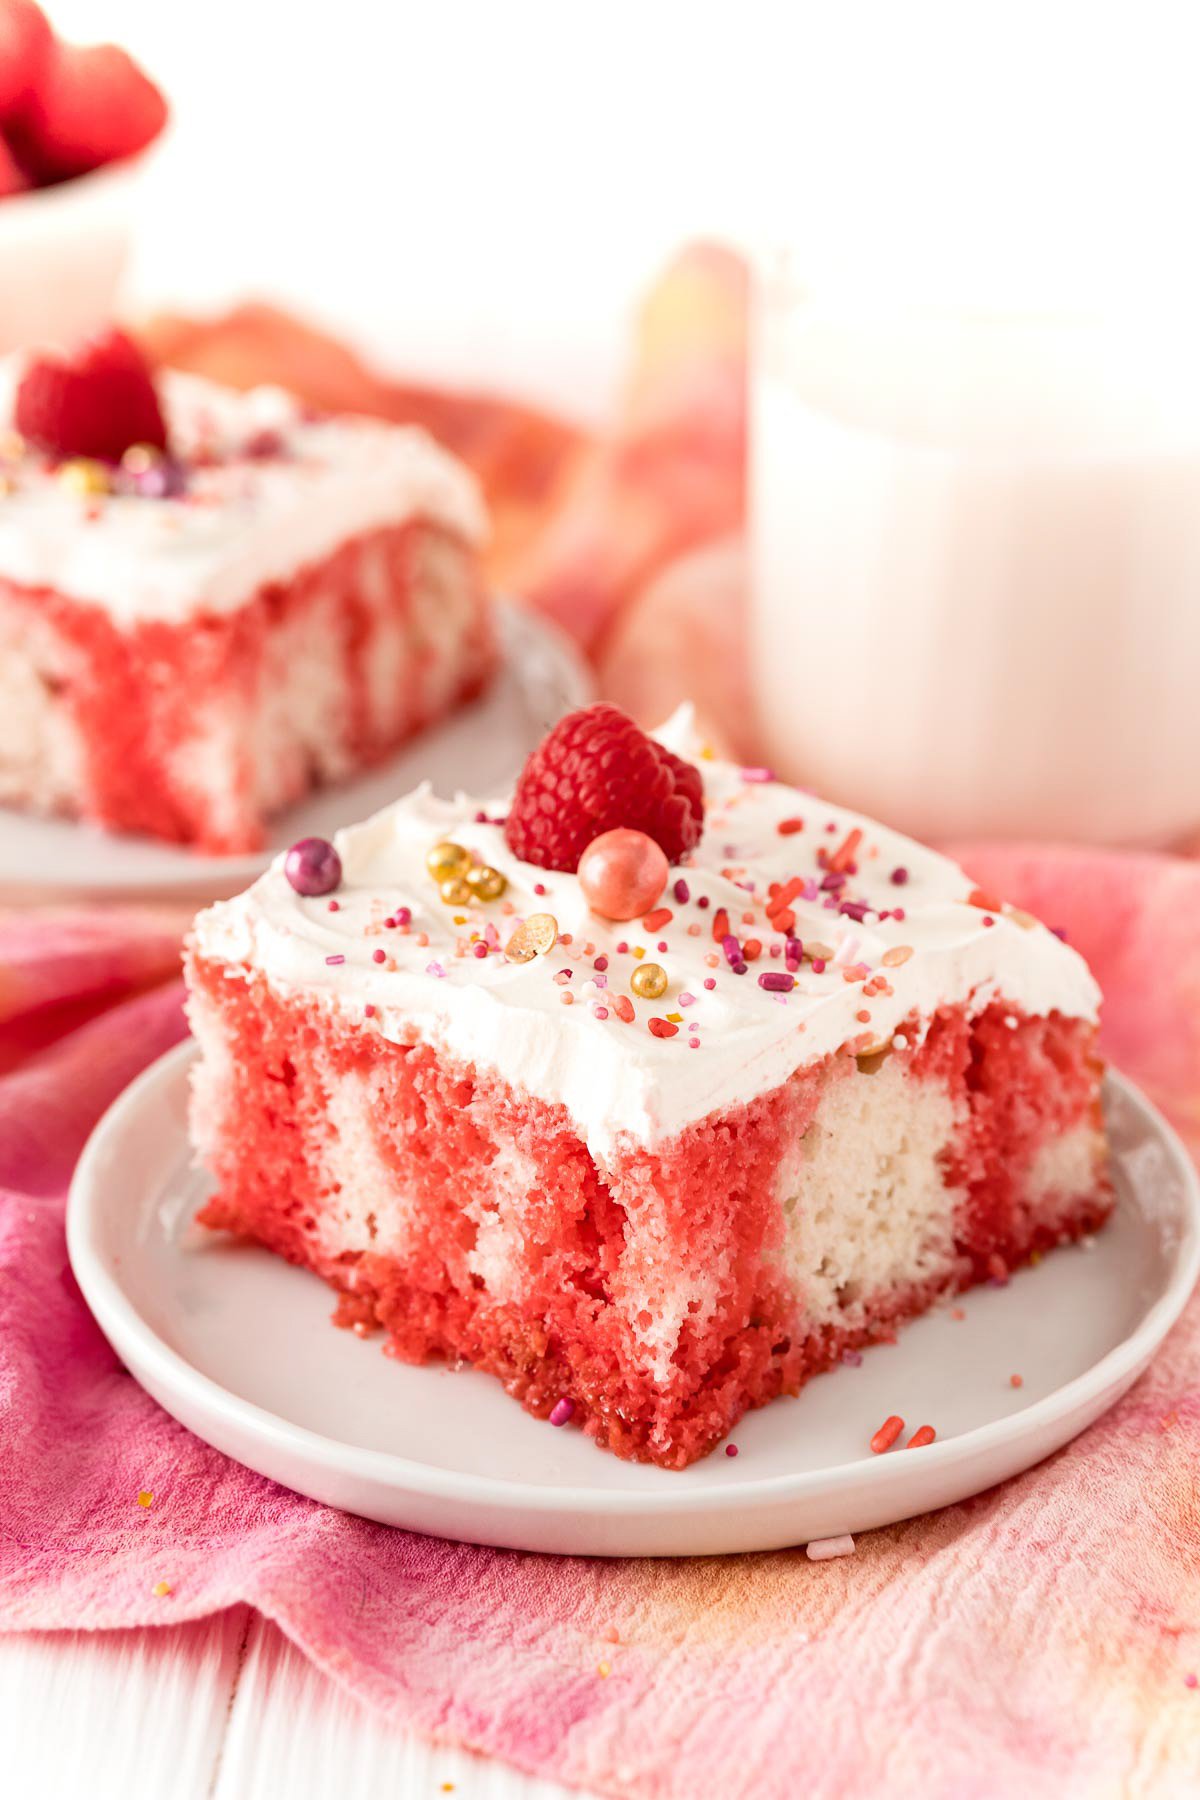 Slice of Raspberry Jello Poke Cake on white plate topped with sprinkles and raspberry